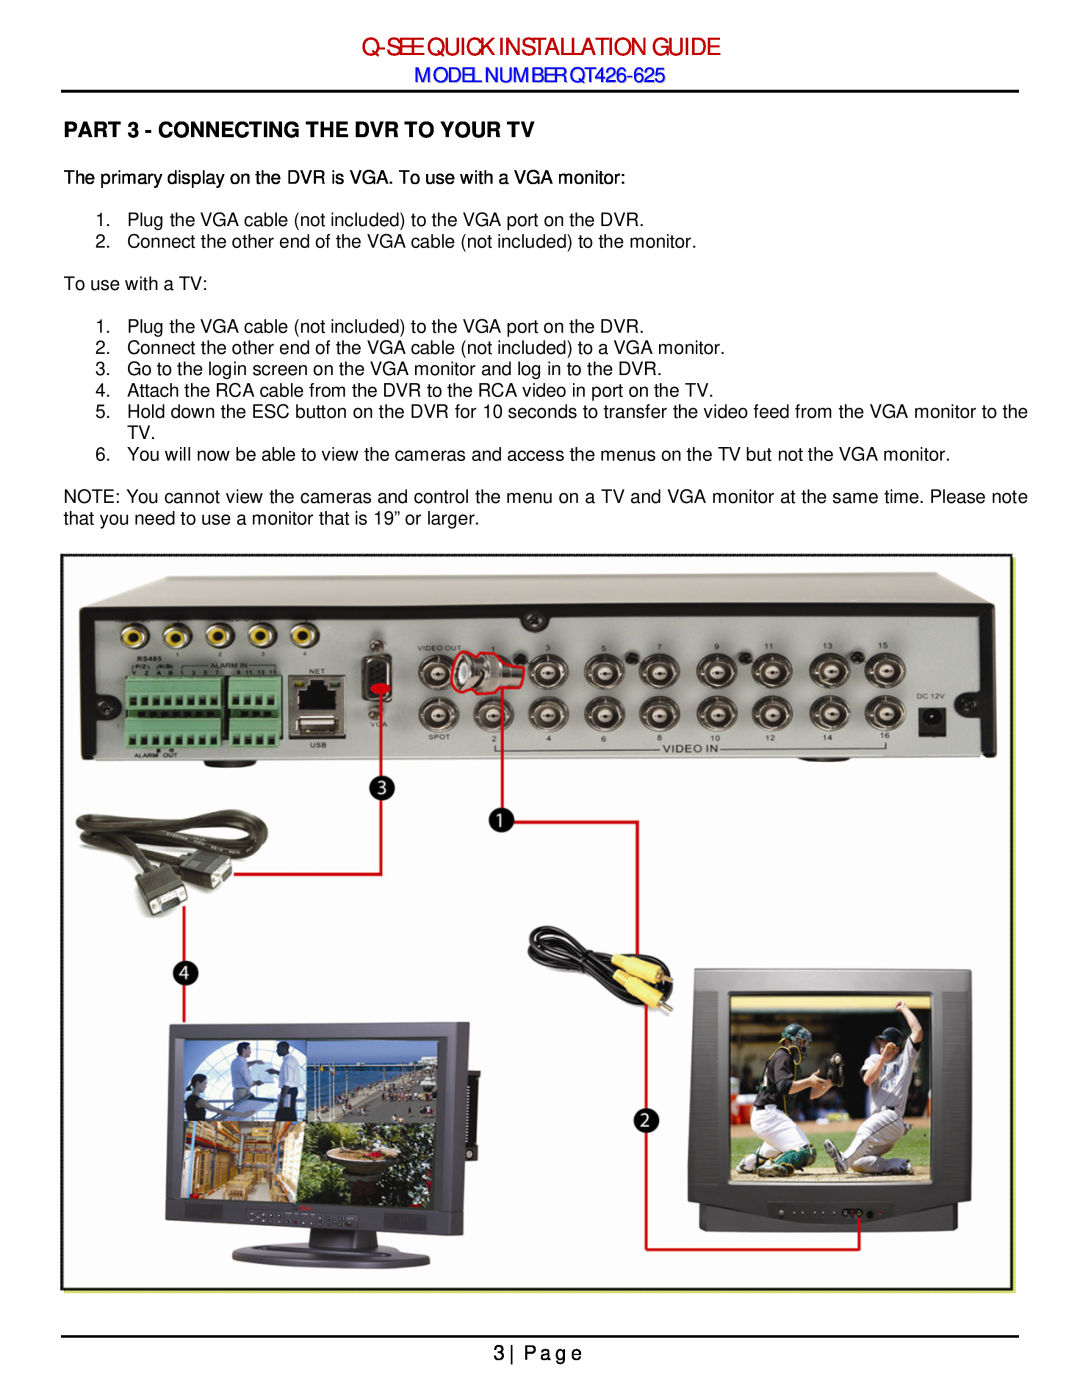 Q-See manual Q-Seequick Installation Guide, MODEL NUMBER QT426-625, PART 3 - CONNECTING THE DVR TO YOUR TV, P a g e 